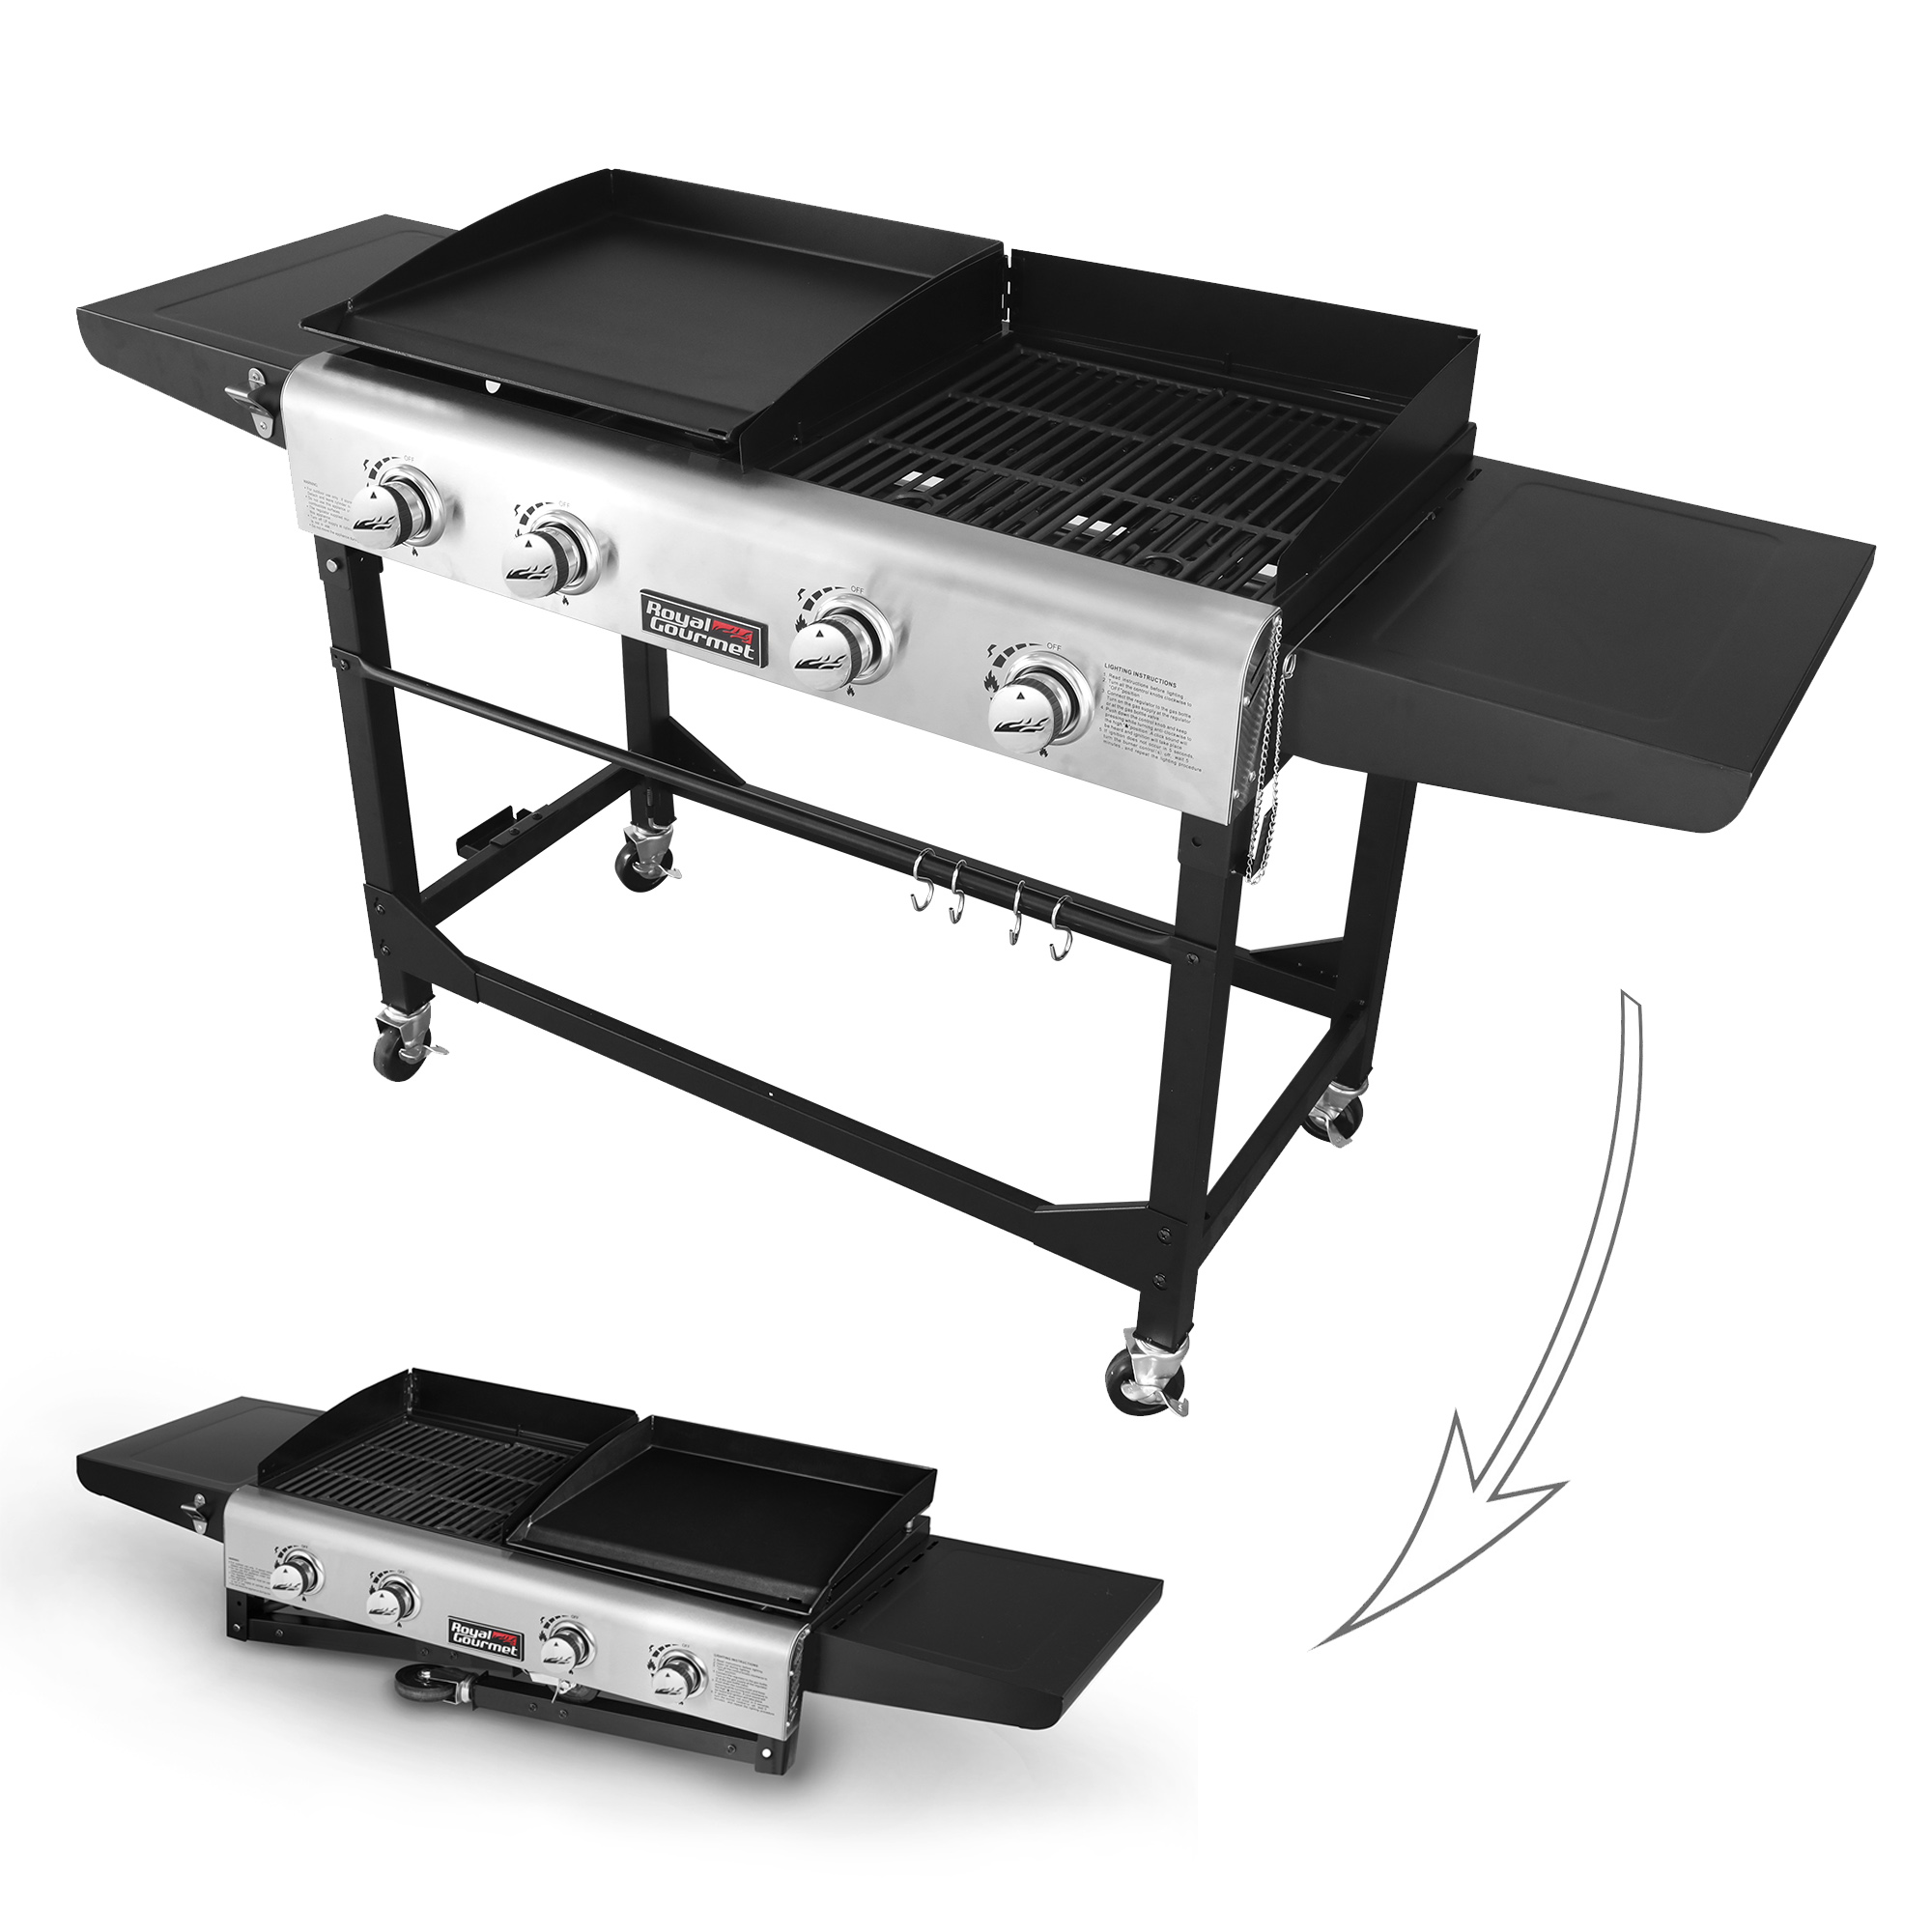 Royal Gourmet 4-Burner GD401 Portable Flat Top Gas Grill and Griddle Combo with Folding Legs - image 2 of 9